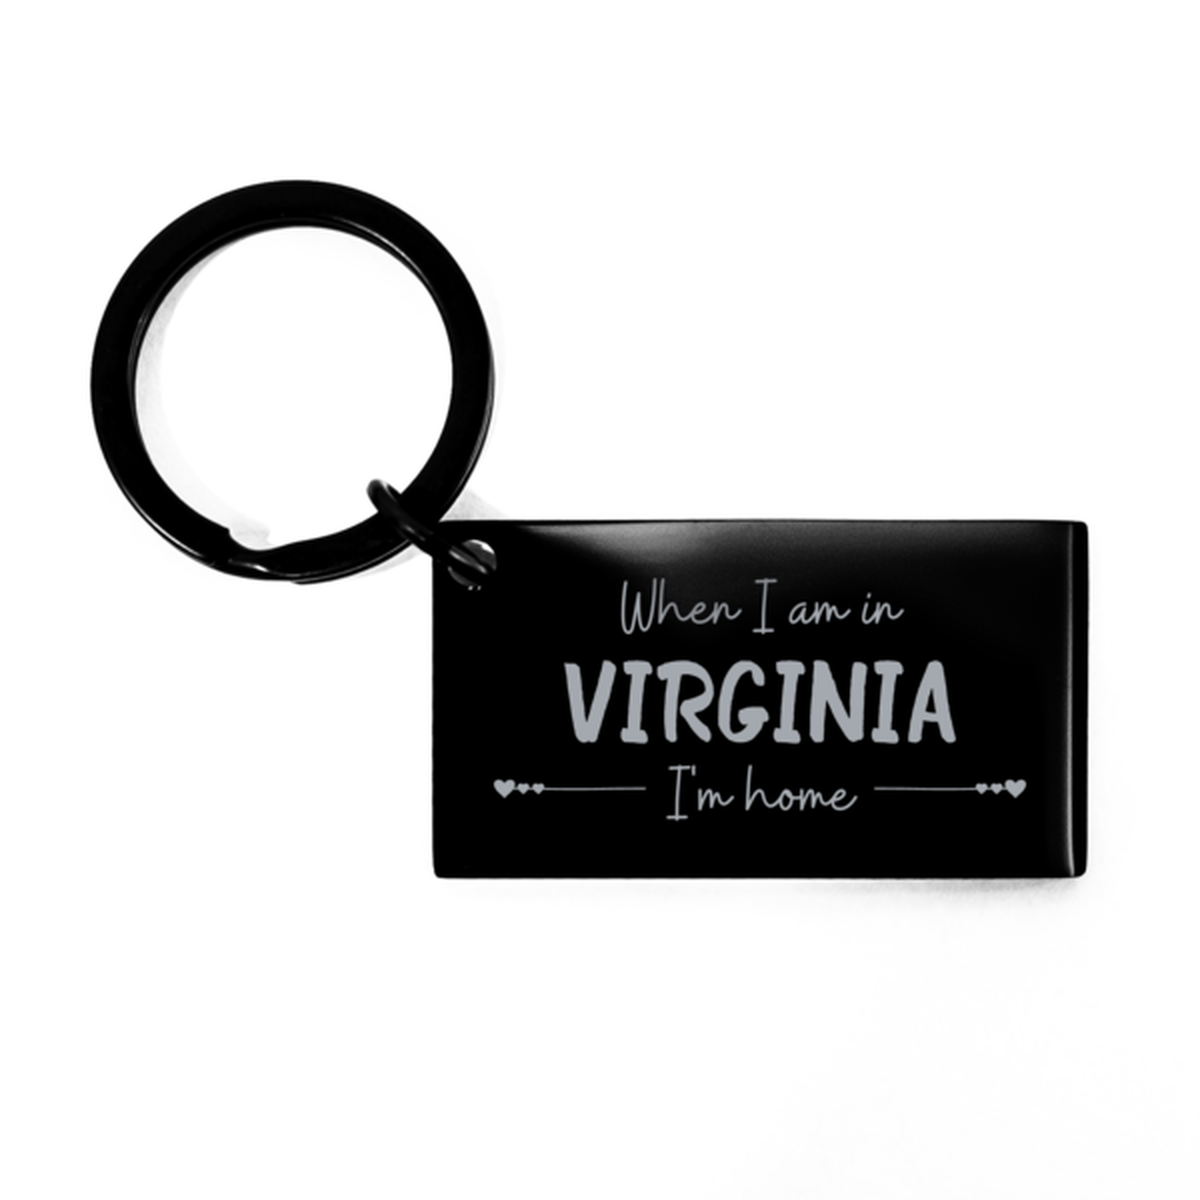 When I am in Virginia I'm home Keychain, Cheap Gifts For Virginia, State Virginia Birthday Gifts for Friends Coworker